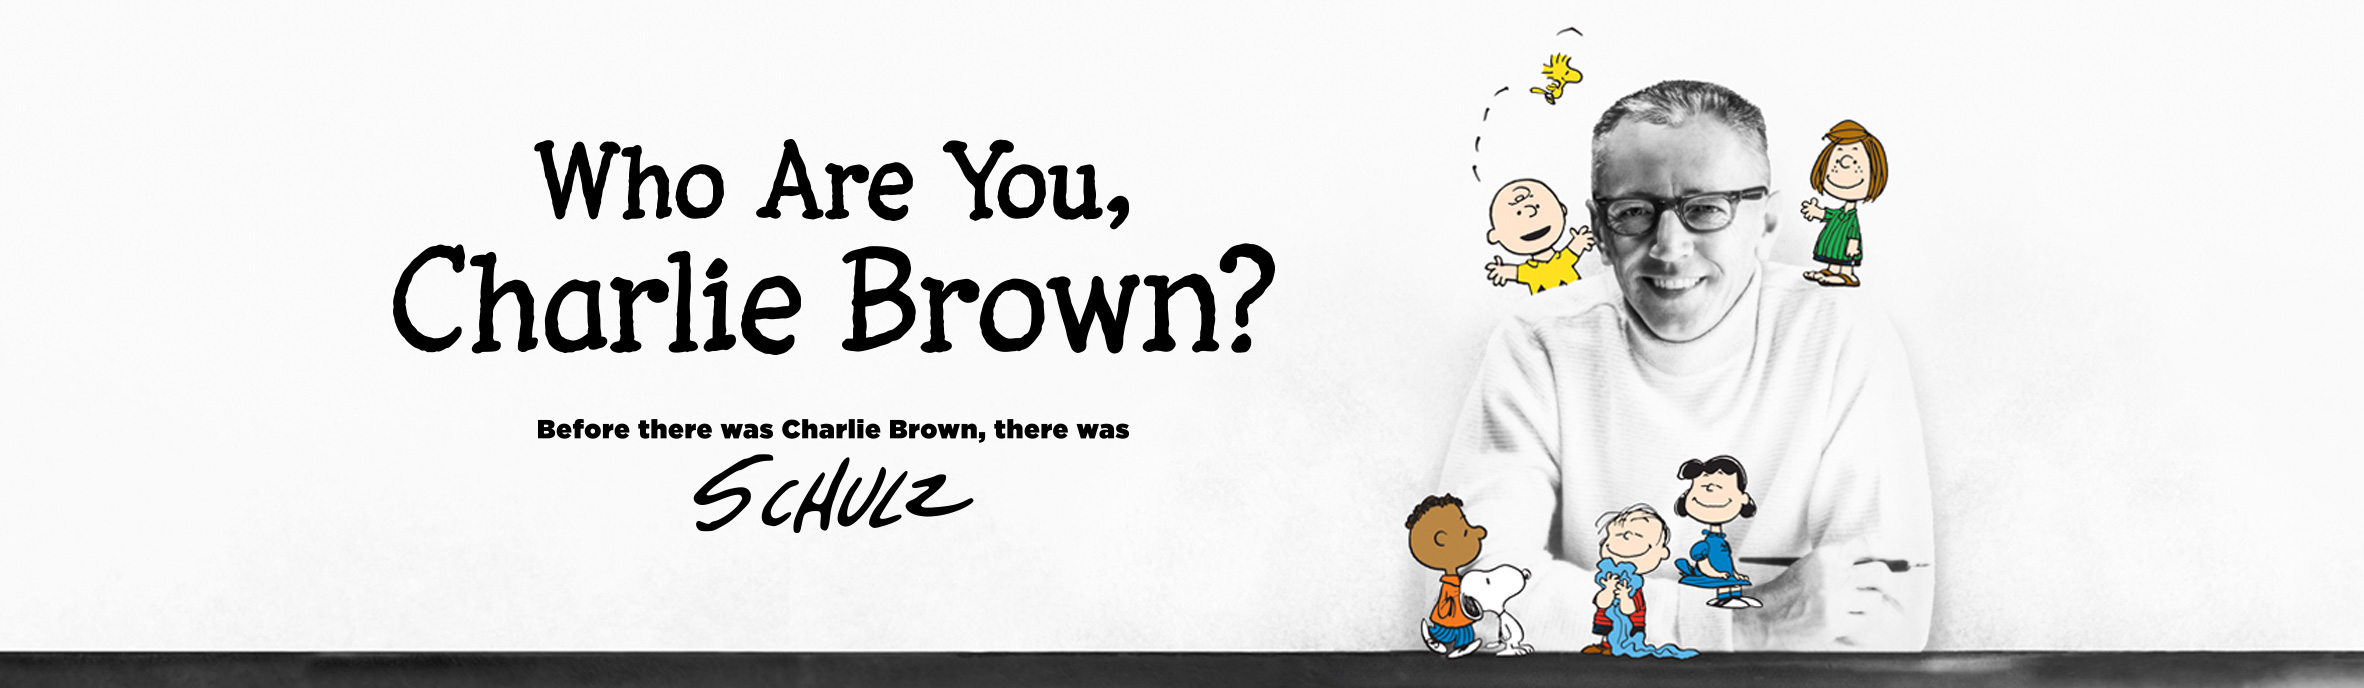 Who Are You, Charlie Brown? - Apple TV+ Press